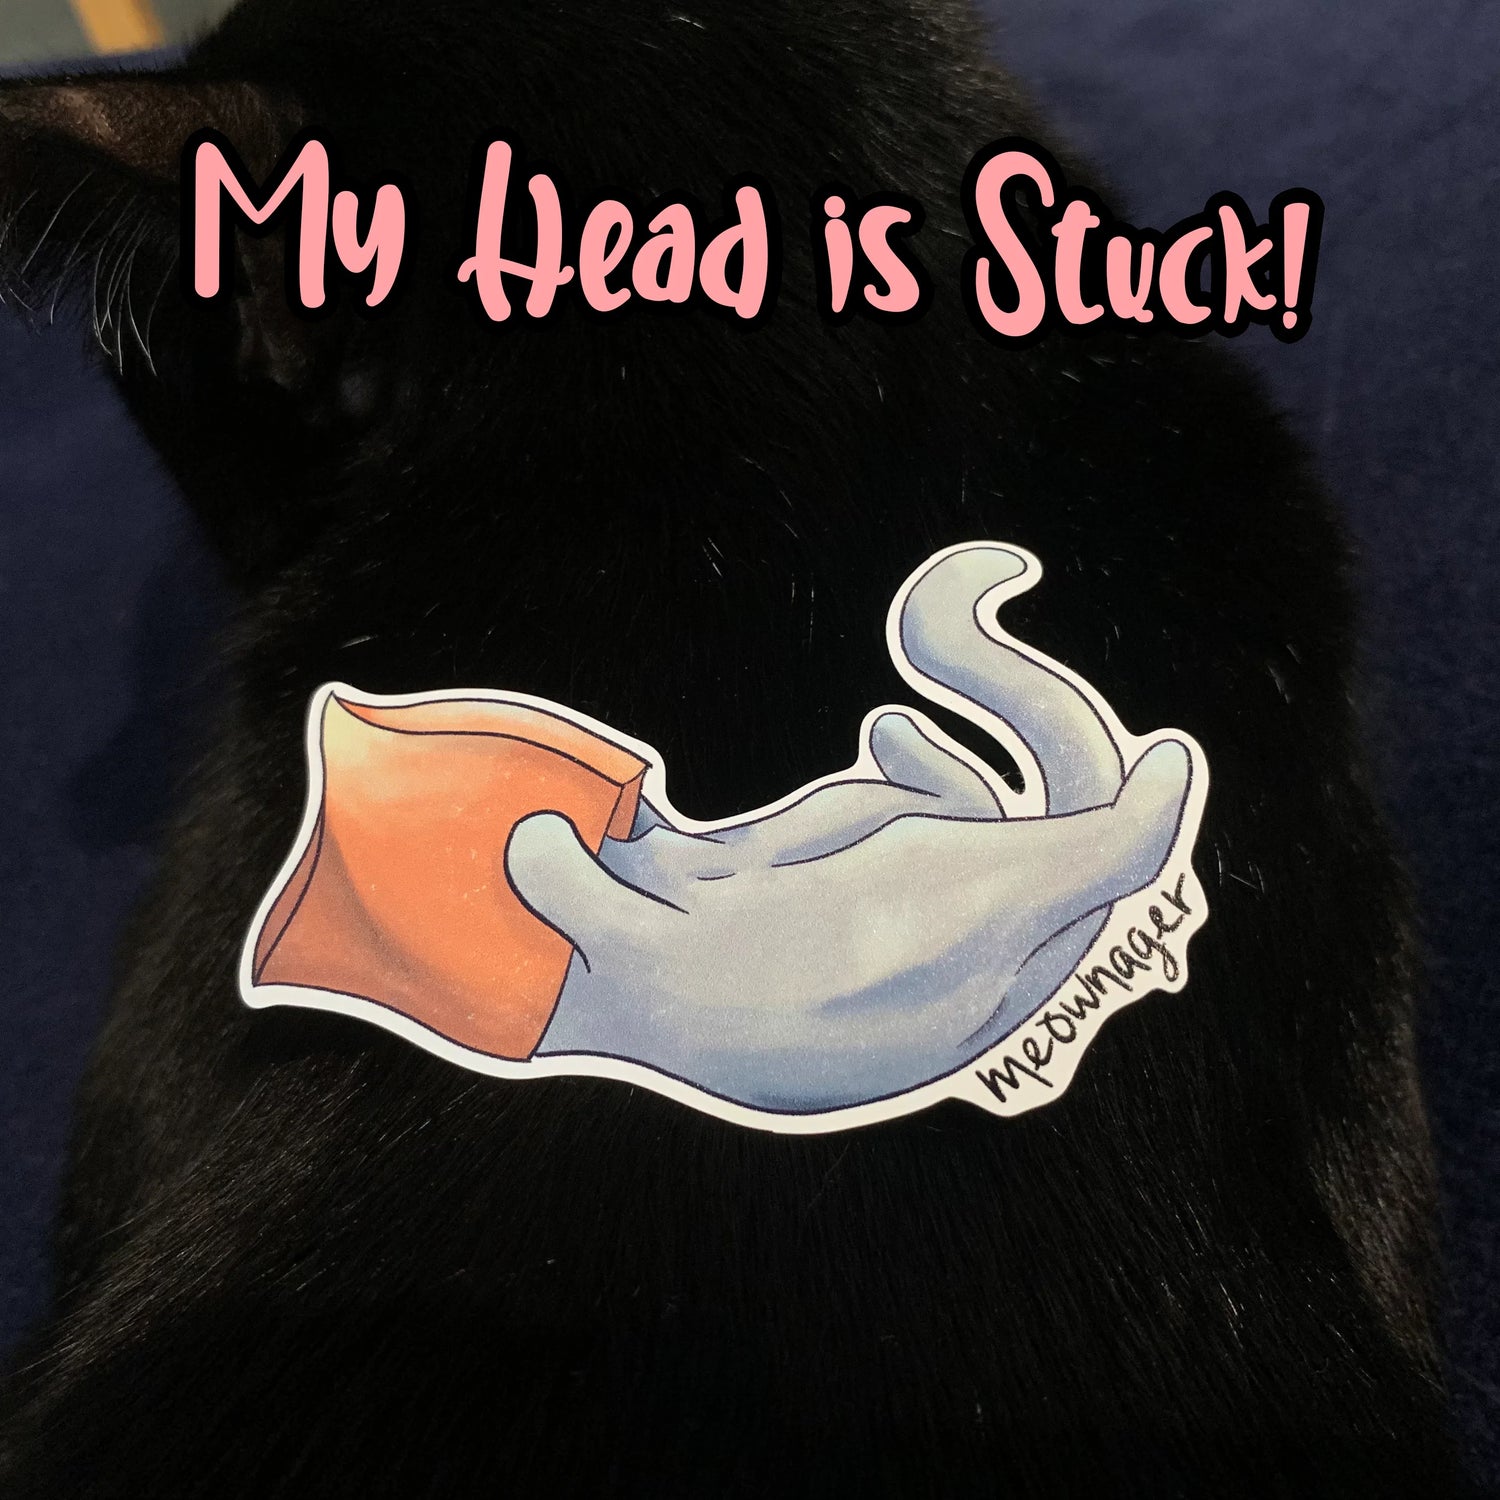 Cat Snack Themed Vinyl Stickers Fuzzy N Chic